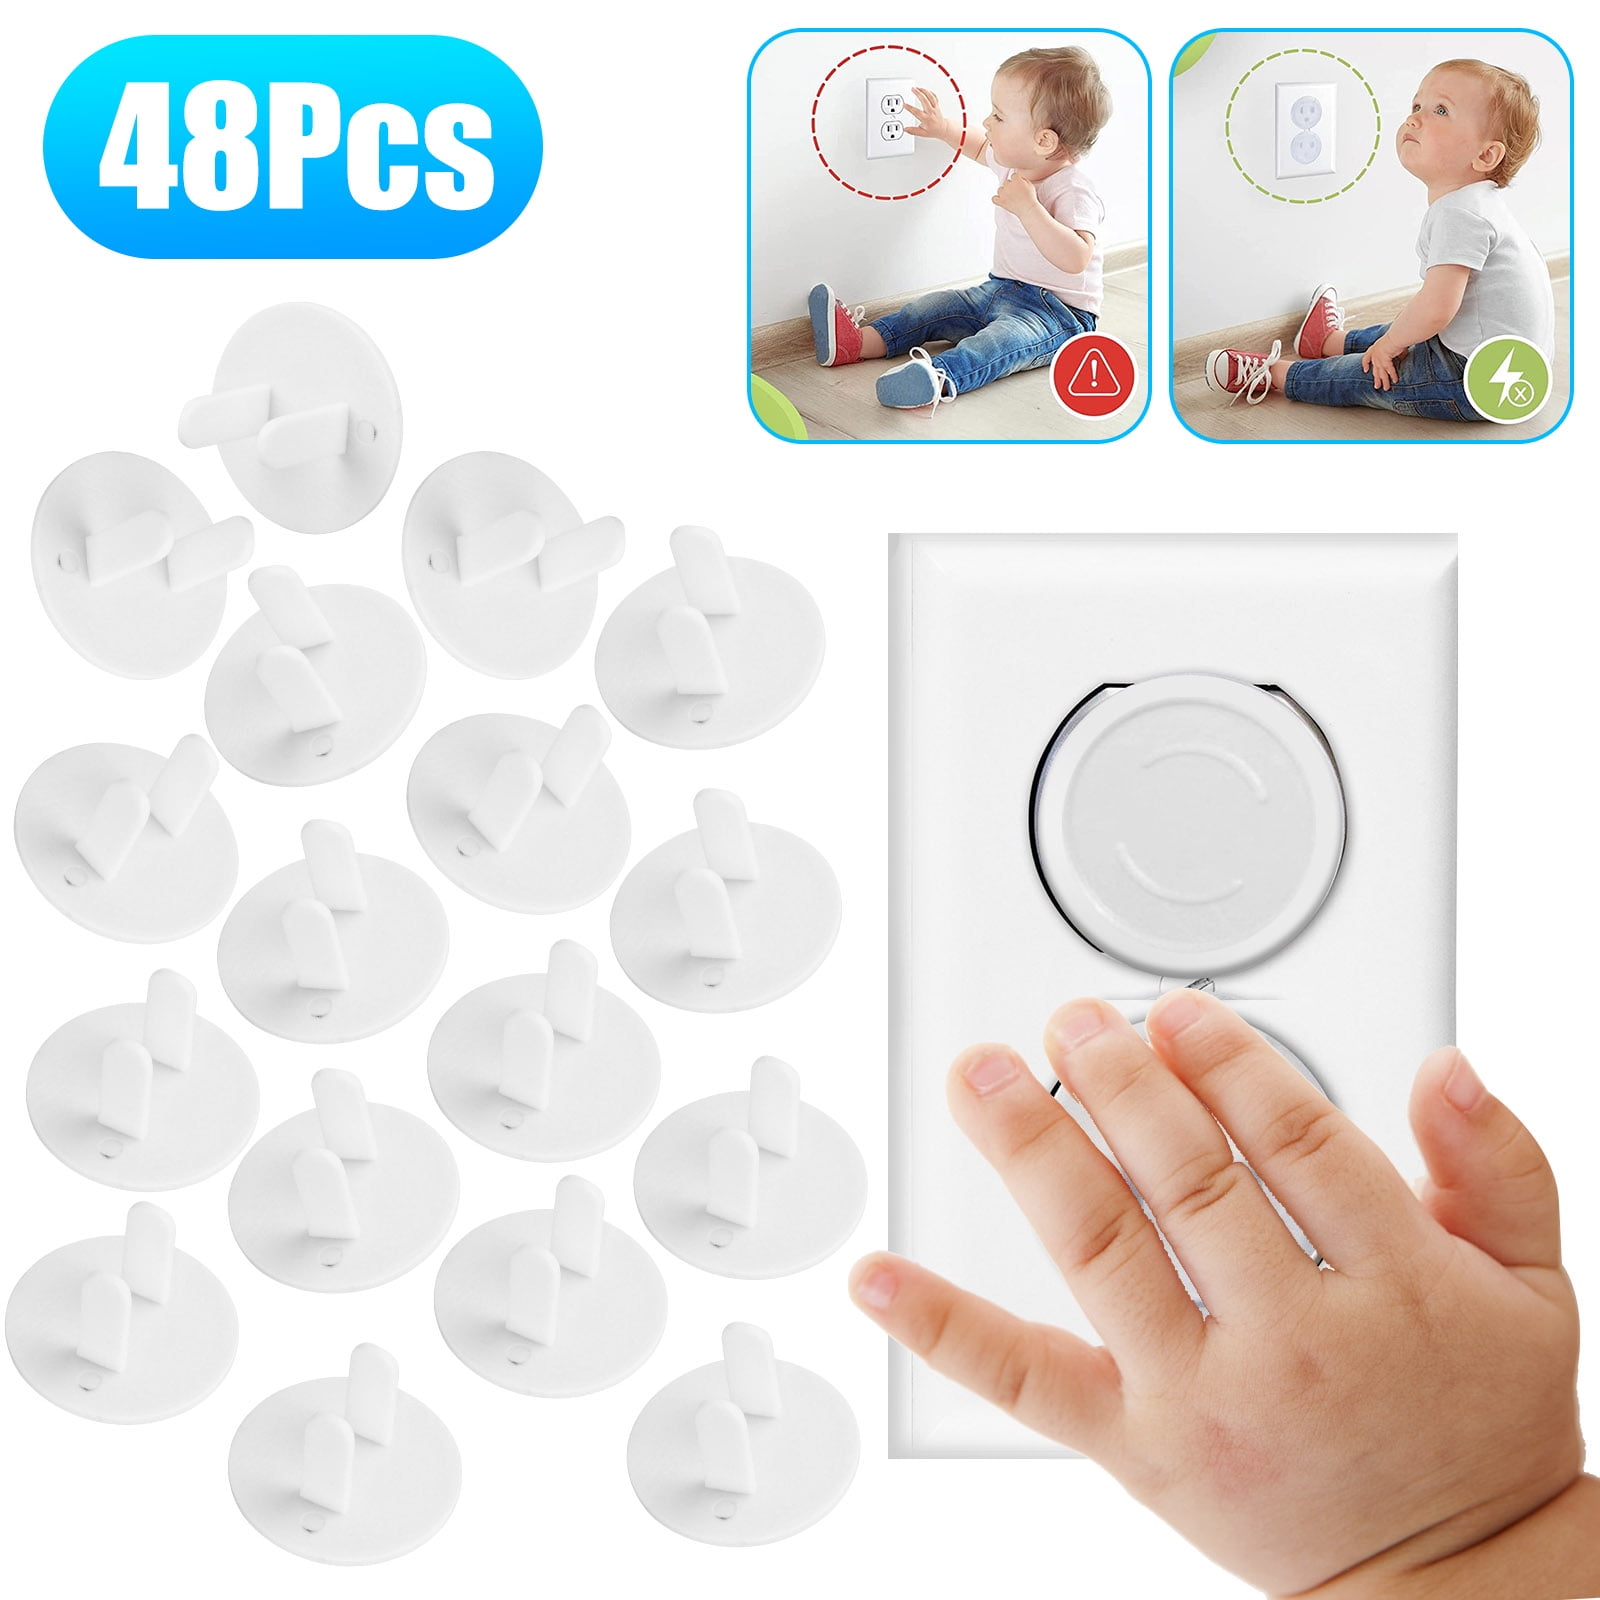 Frosty Clear Child Safety Outlet Plug Covers 48 Pack 